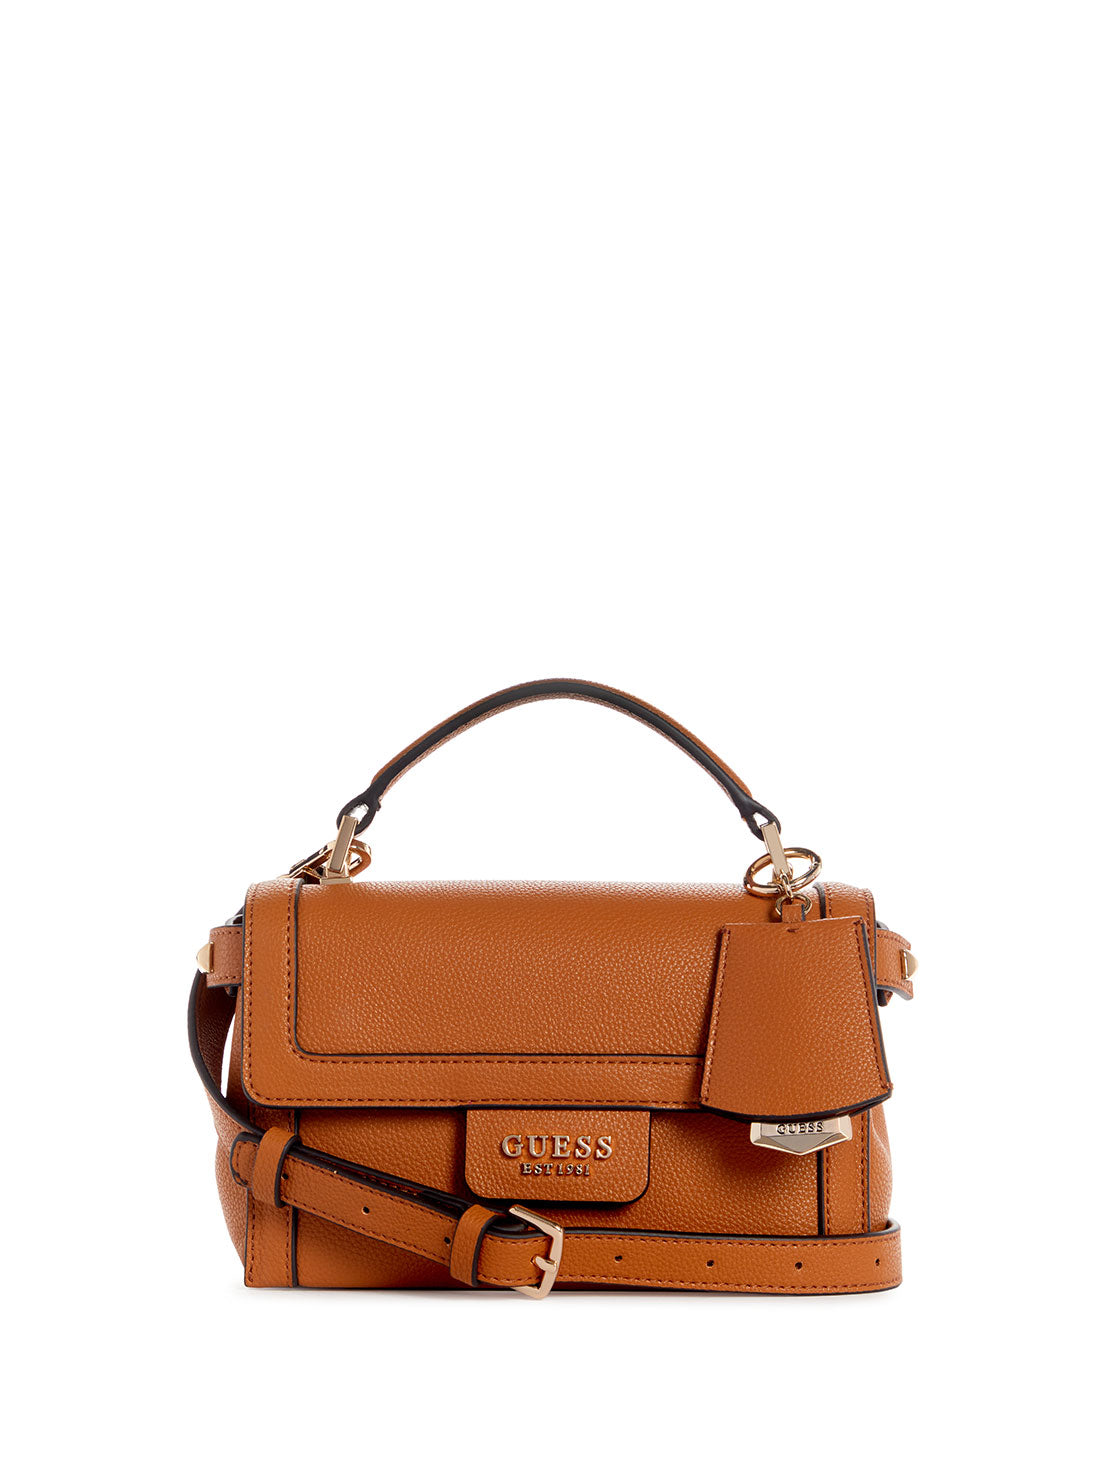 GUESS Women's Cognac Angy Crossbody Bag VG897178 Front View